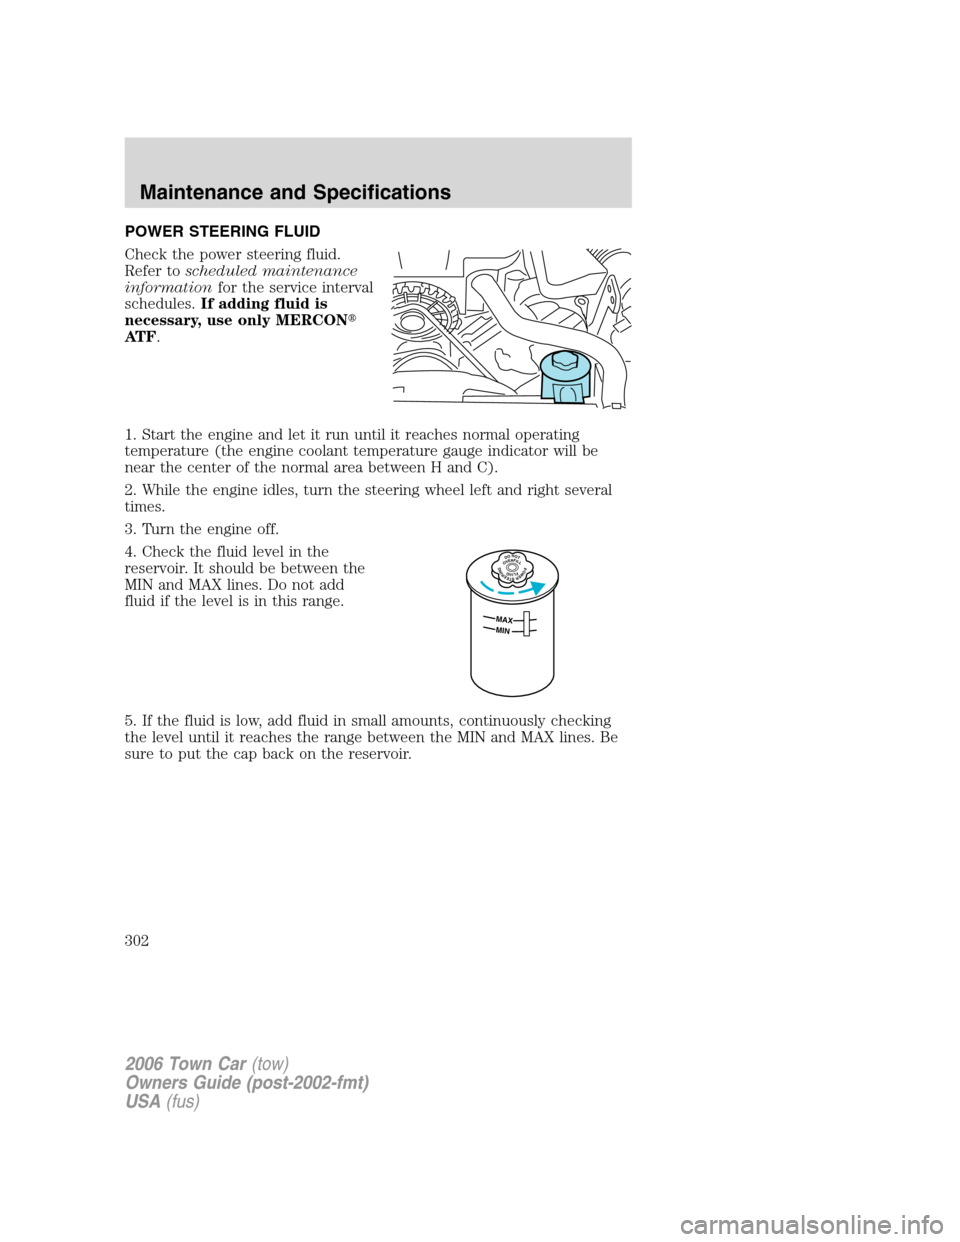 LINCOLN TOWN CAR 2006 Service Manual POWER STEERING FLUID
Check the power steering fluid.
Refer toscheduled maintenance
informationfor the service interval
schedules.If adding fluid is
necessary, use only MERCON
AT F.
1. Start the engin